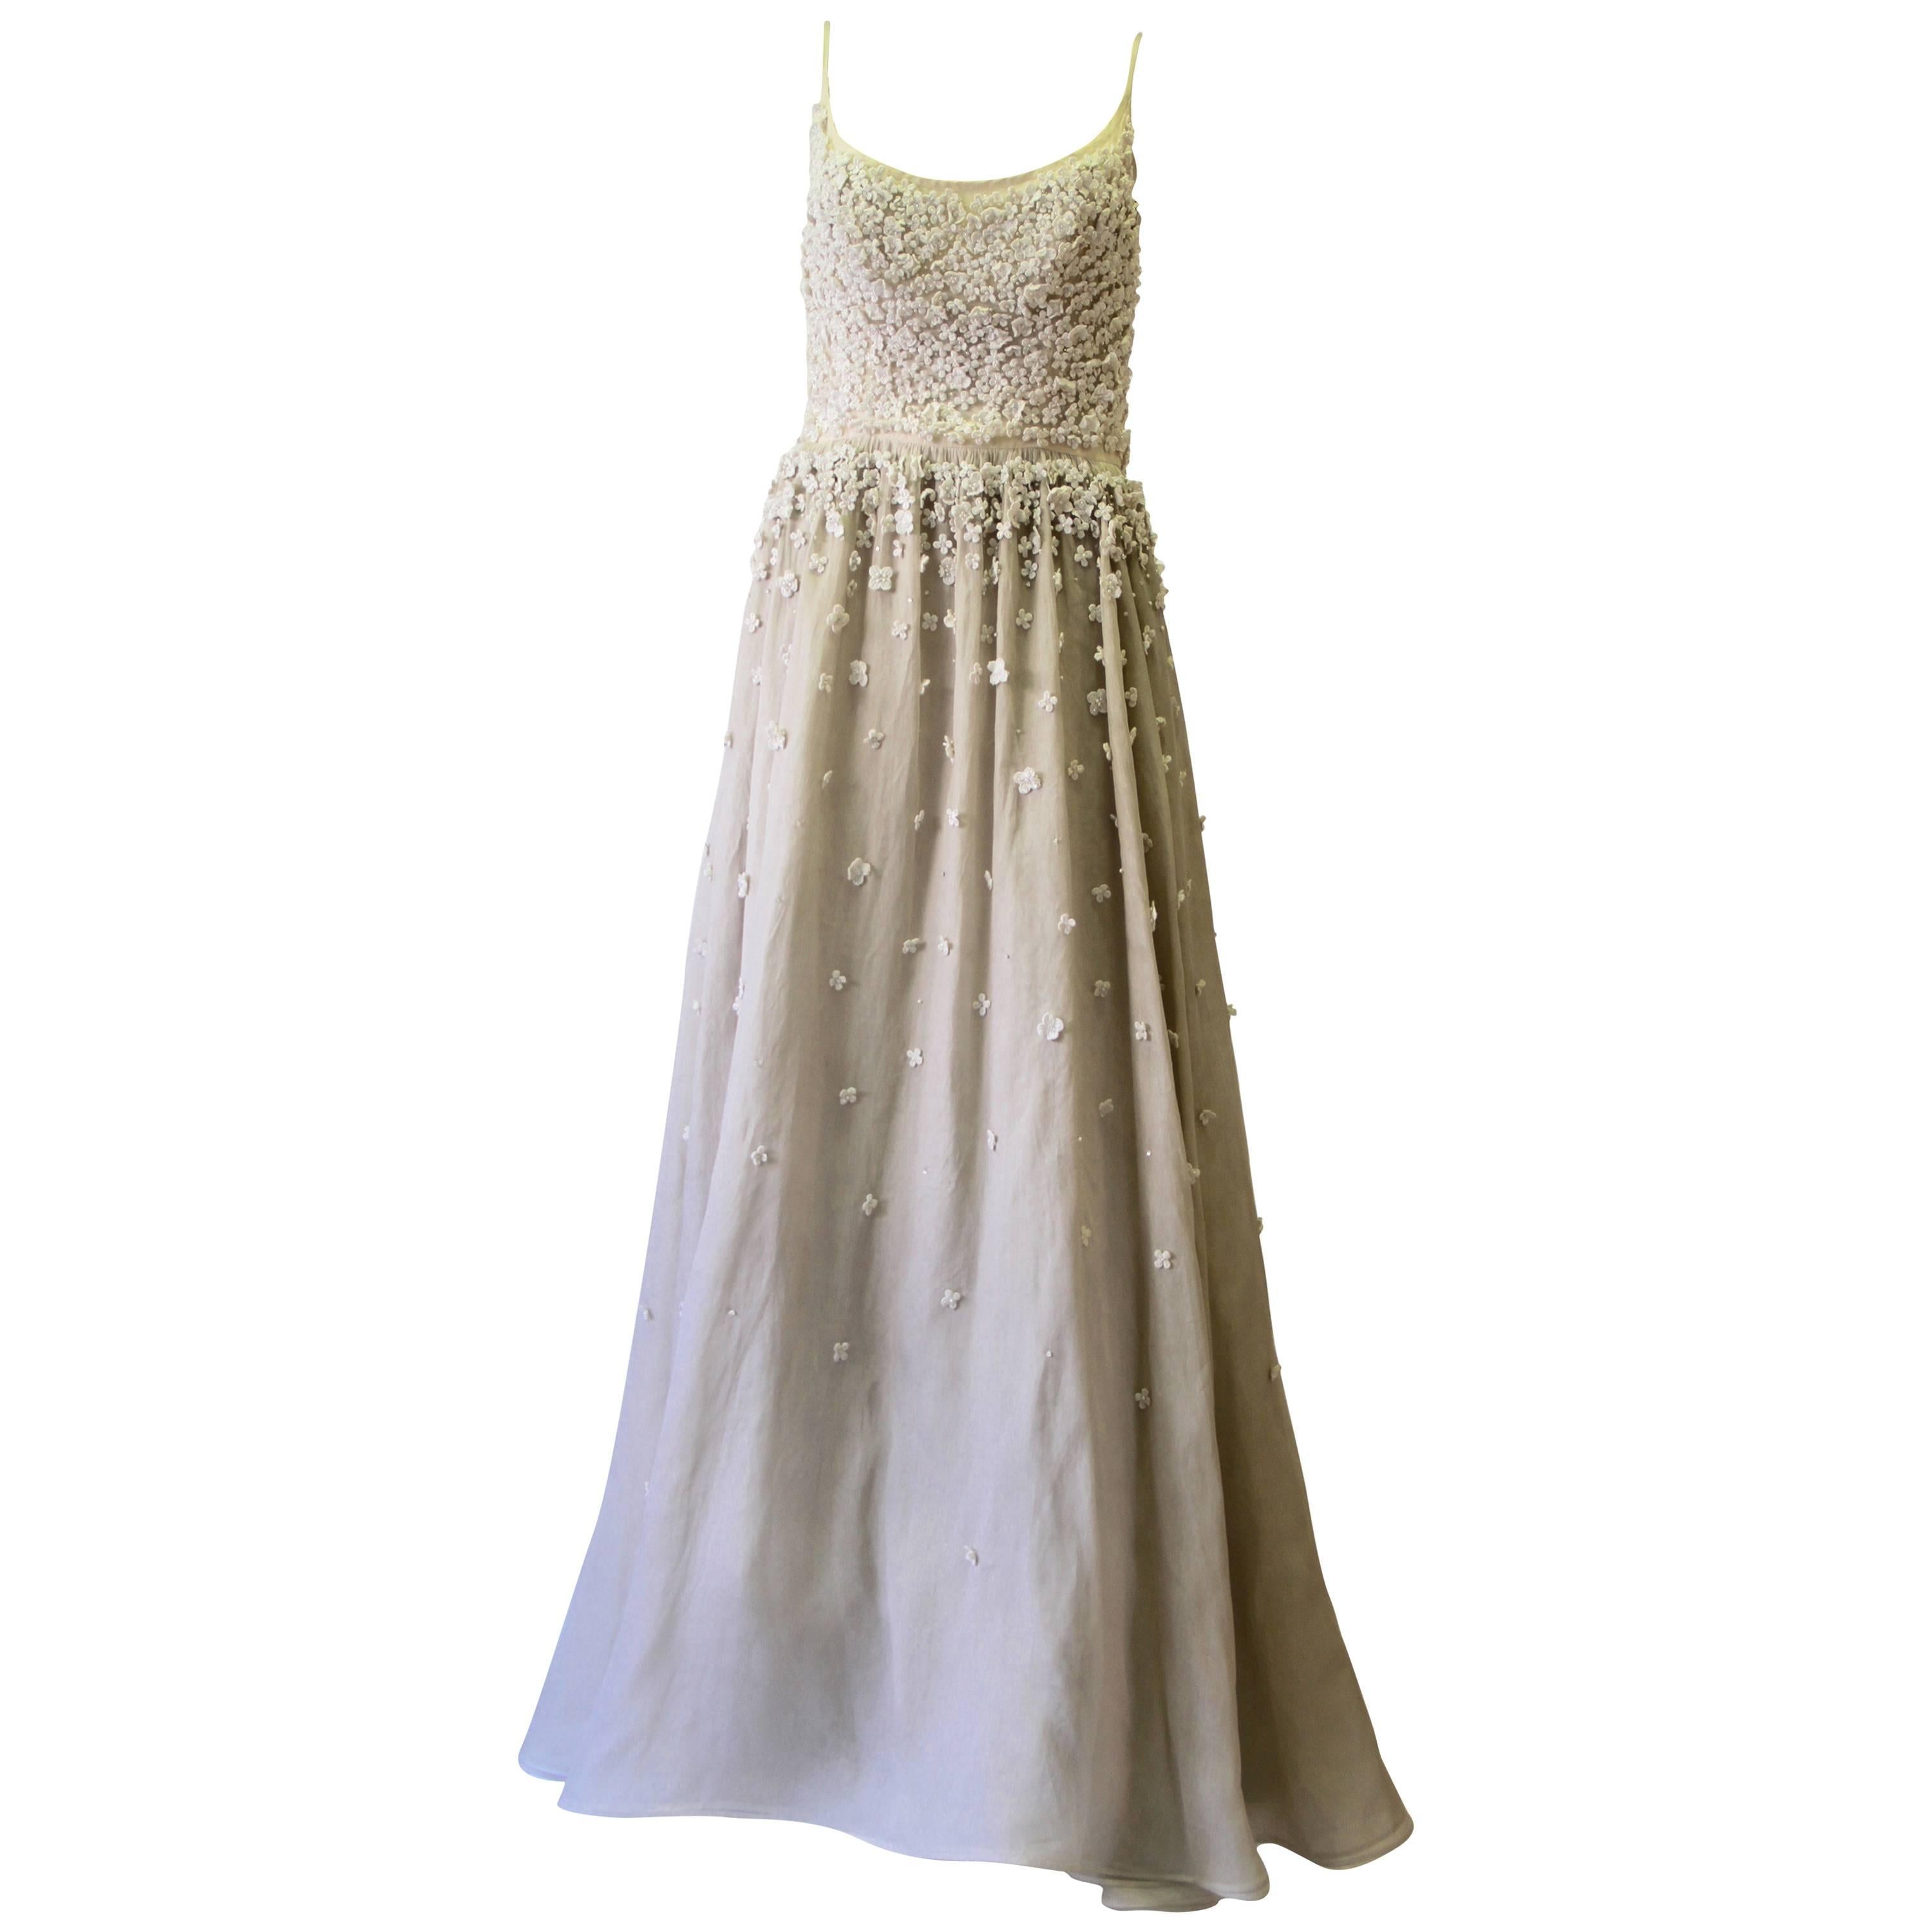 Important Pino Lancetti  Hand Embroidered Wedding Gown 1992 For Sale